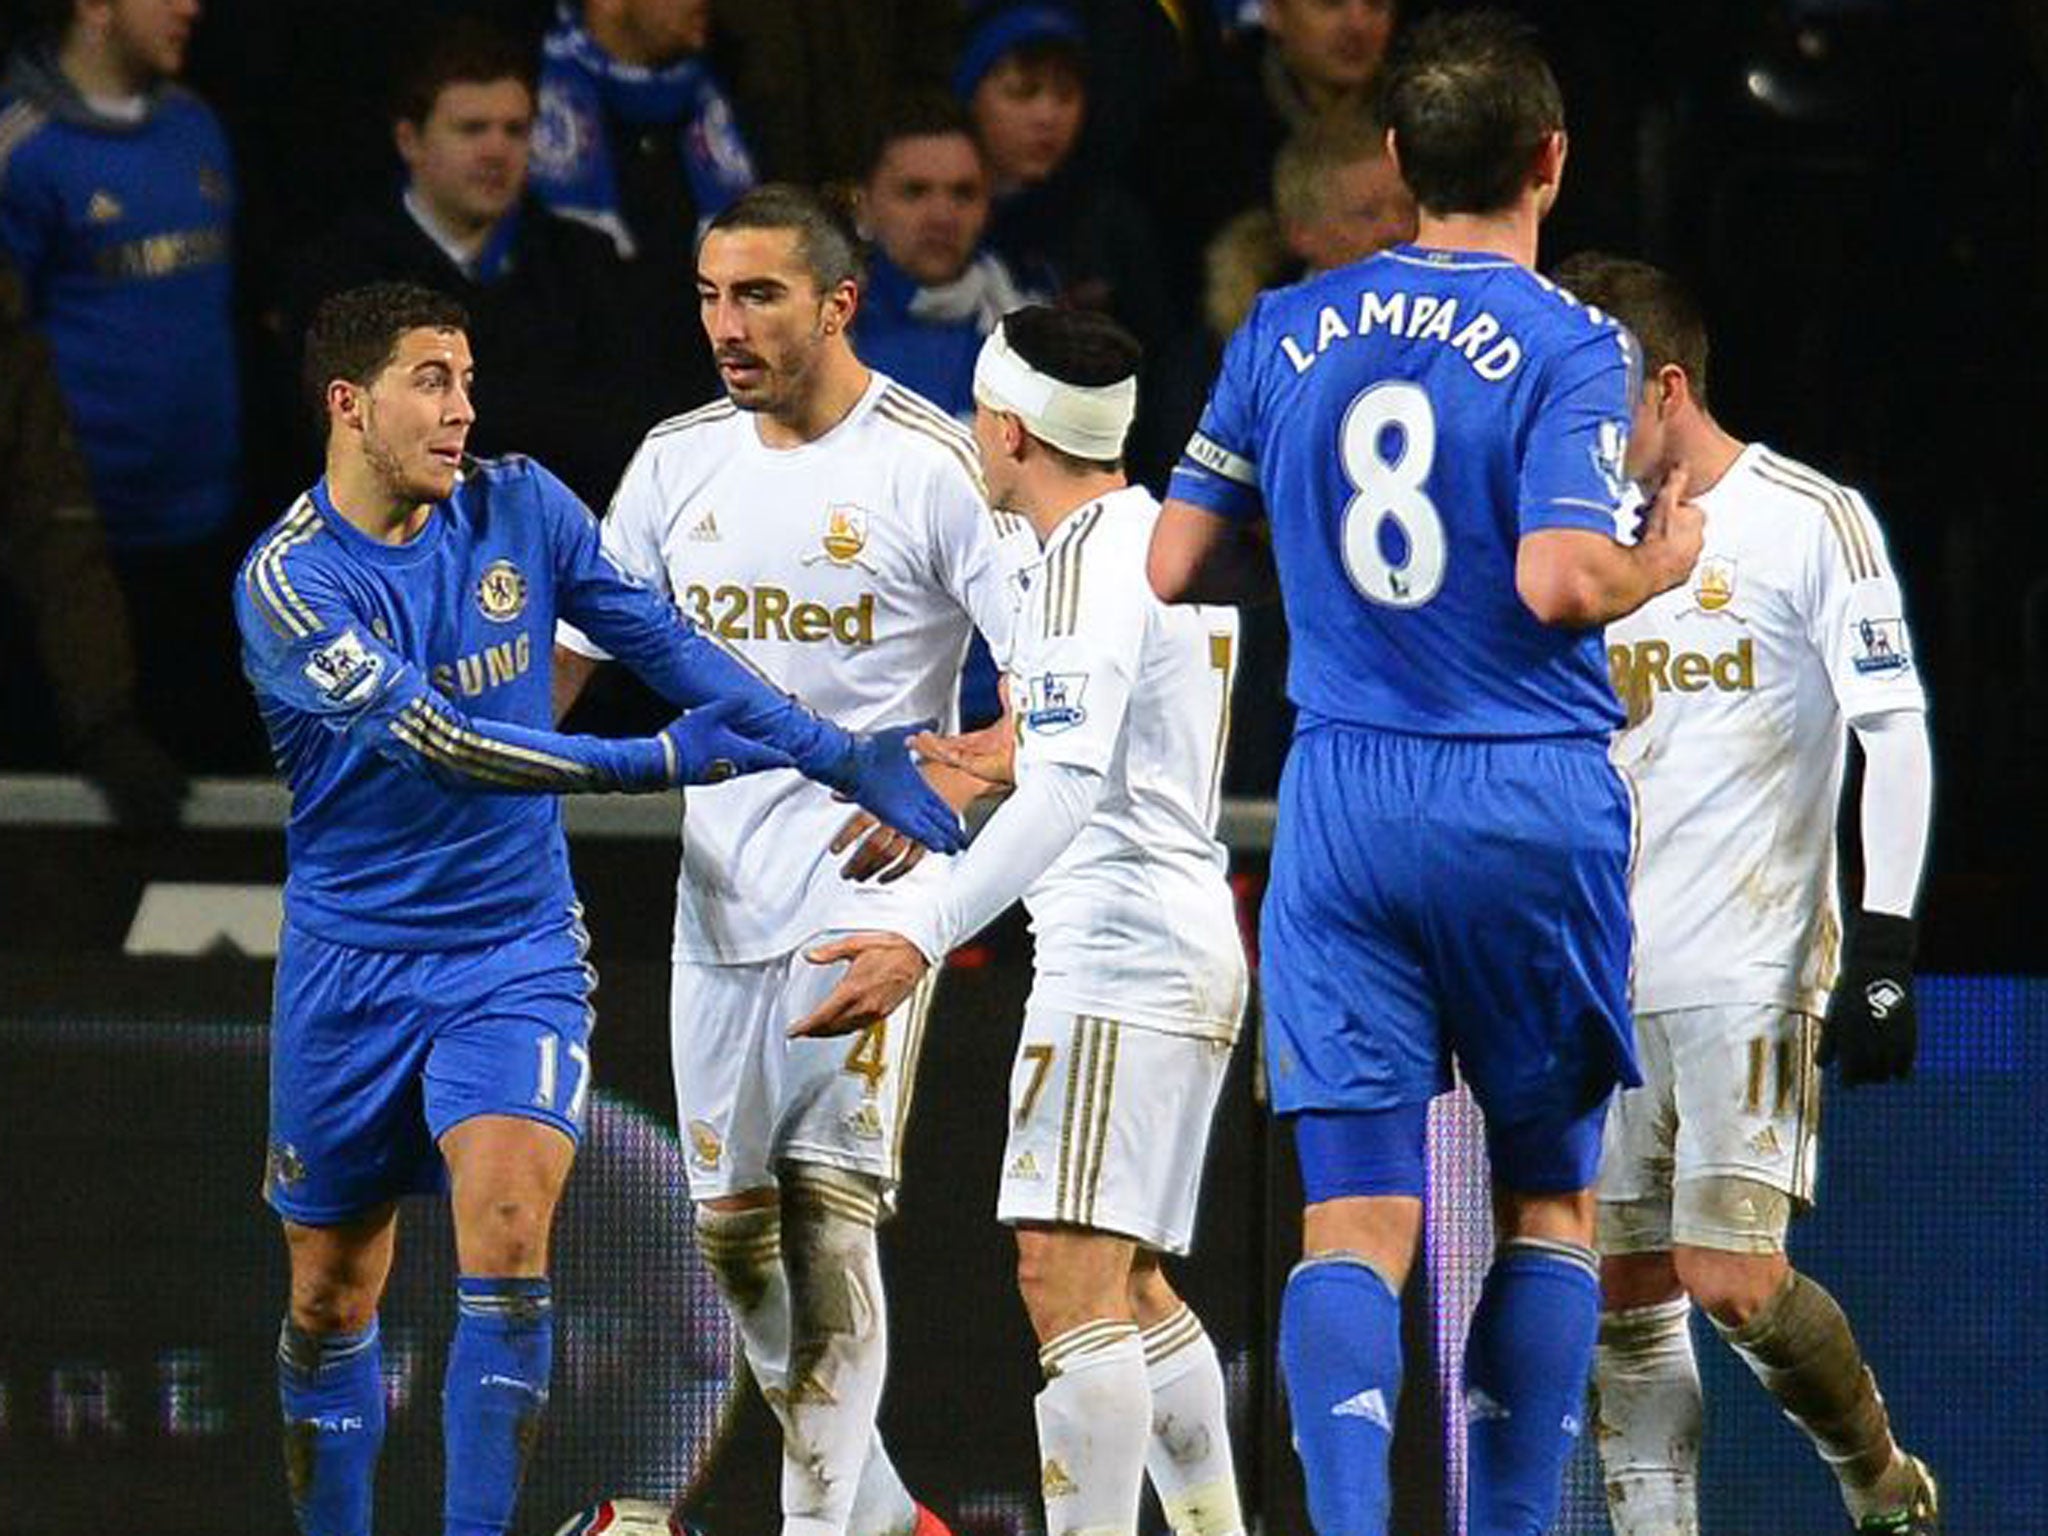 Swansea players remonstrate with Eden Hazard after the incident